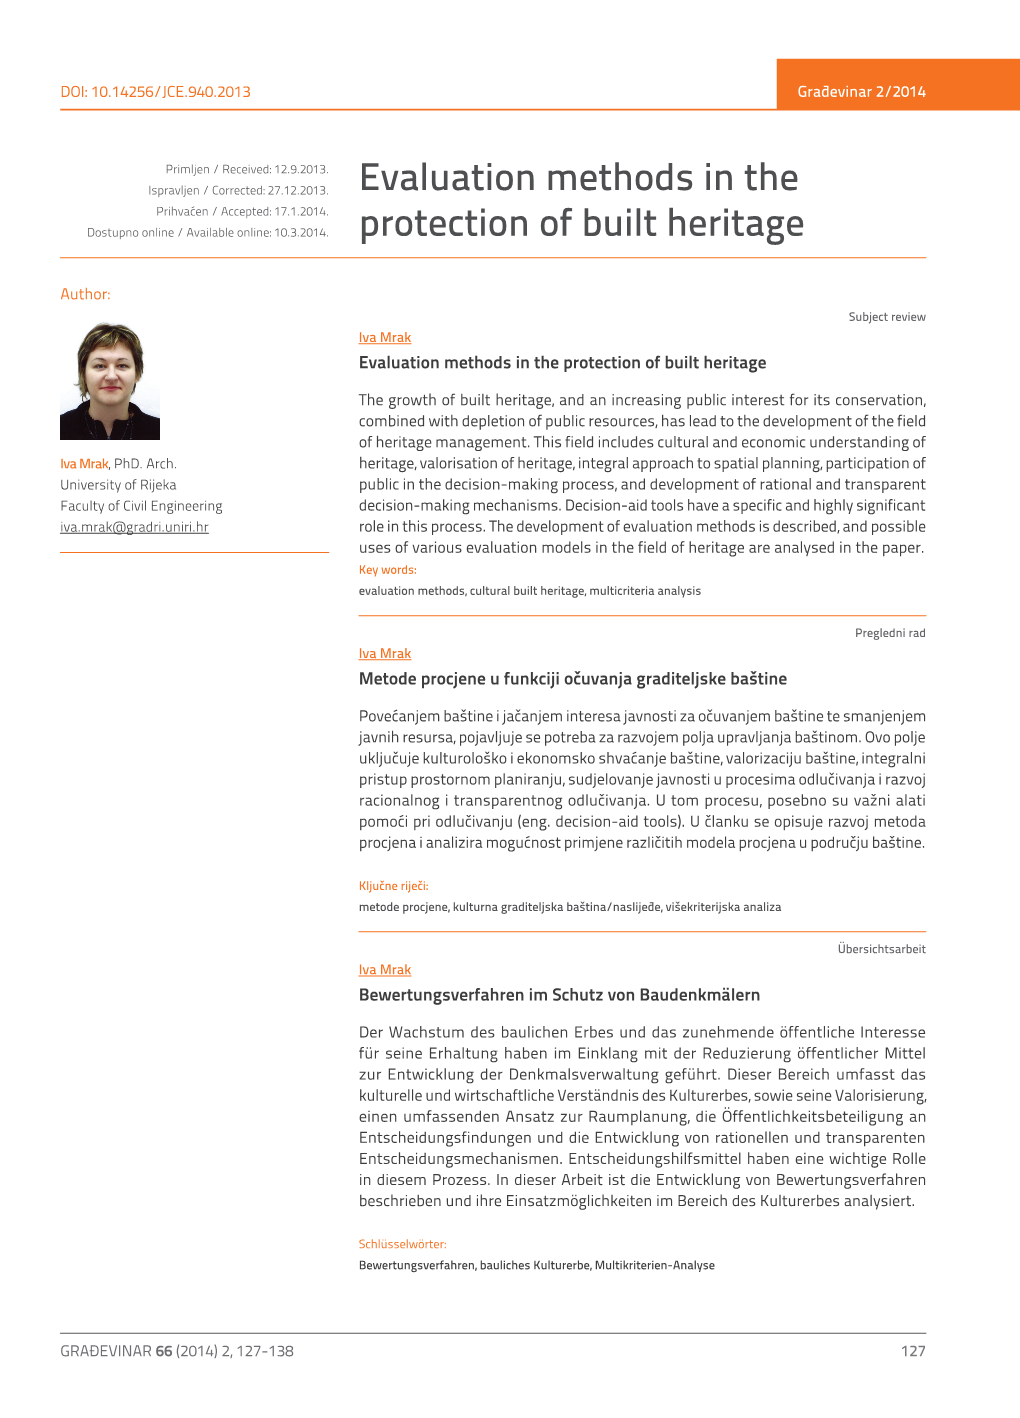 Evaluation Methods in the Protection of Built Heritage